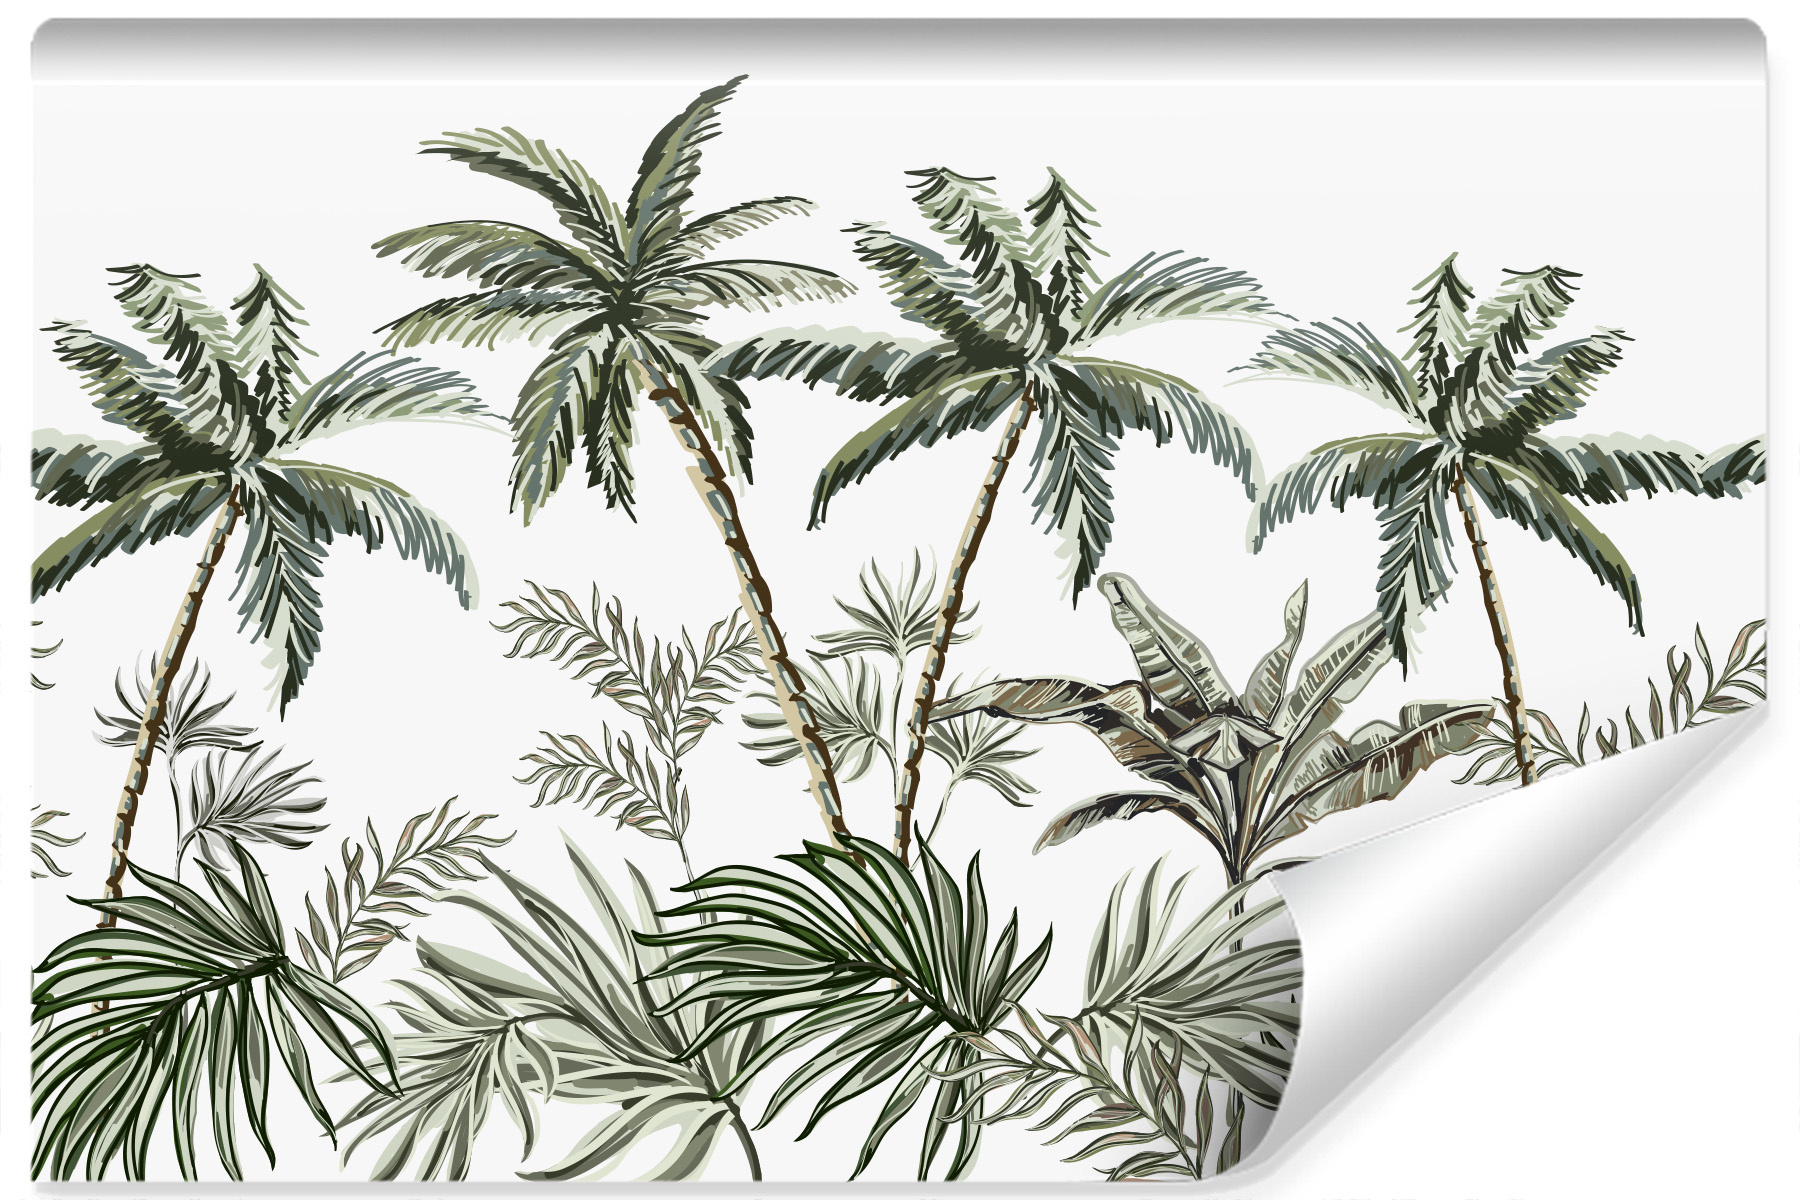 Photo wallpaper Palm trees and tropical plants Non-woven 104 x 70.5 cm FT-2780-VEM